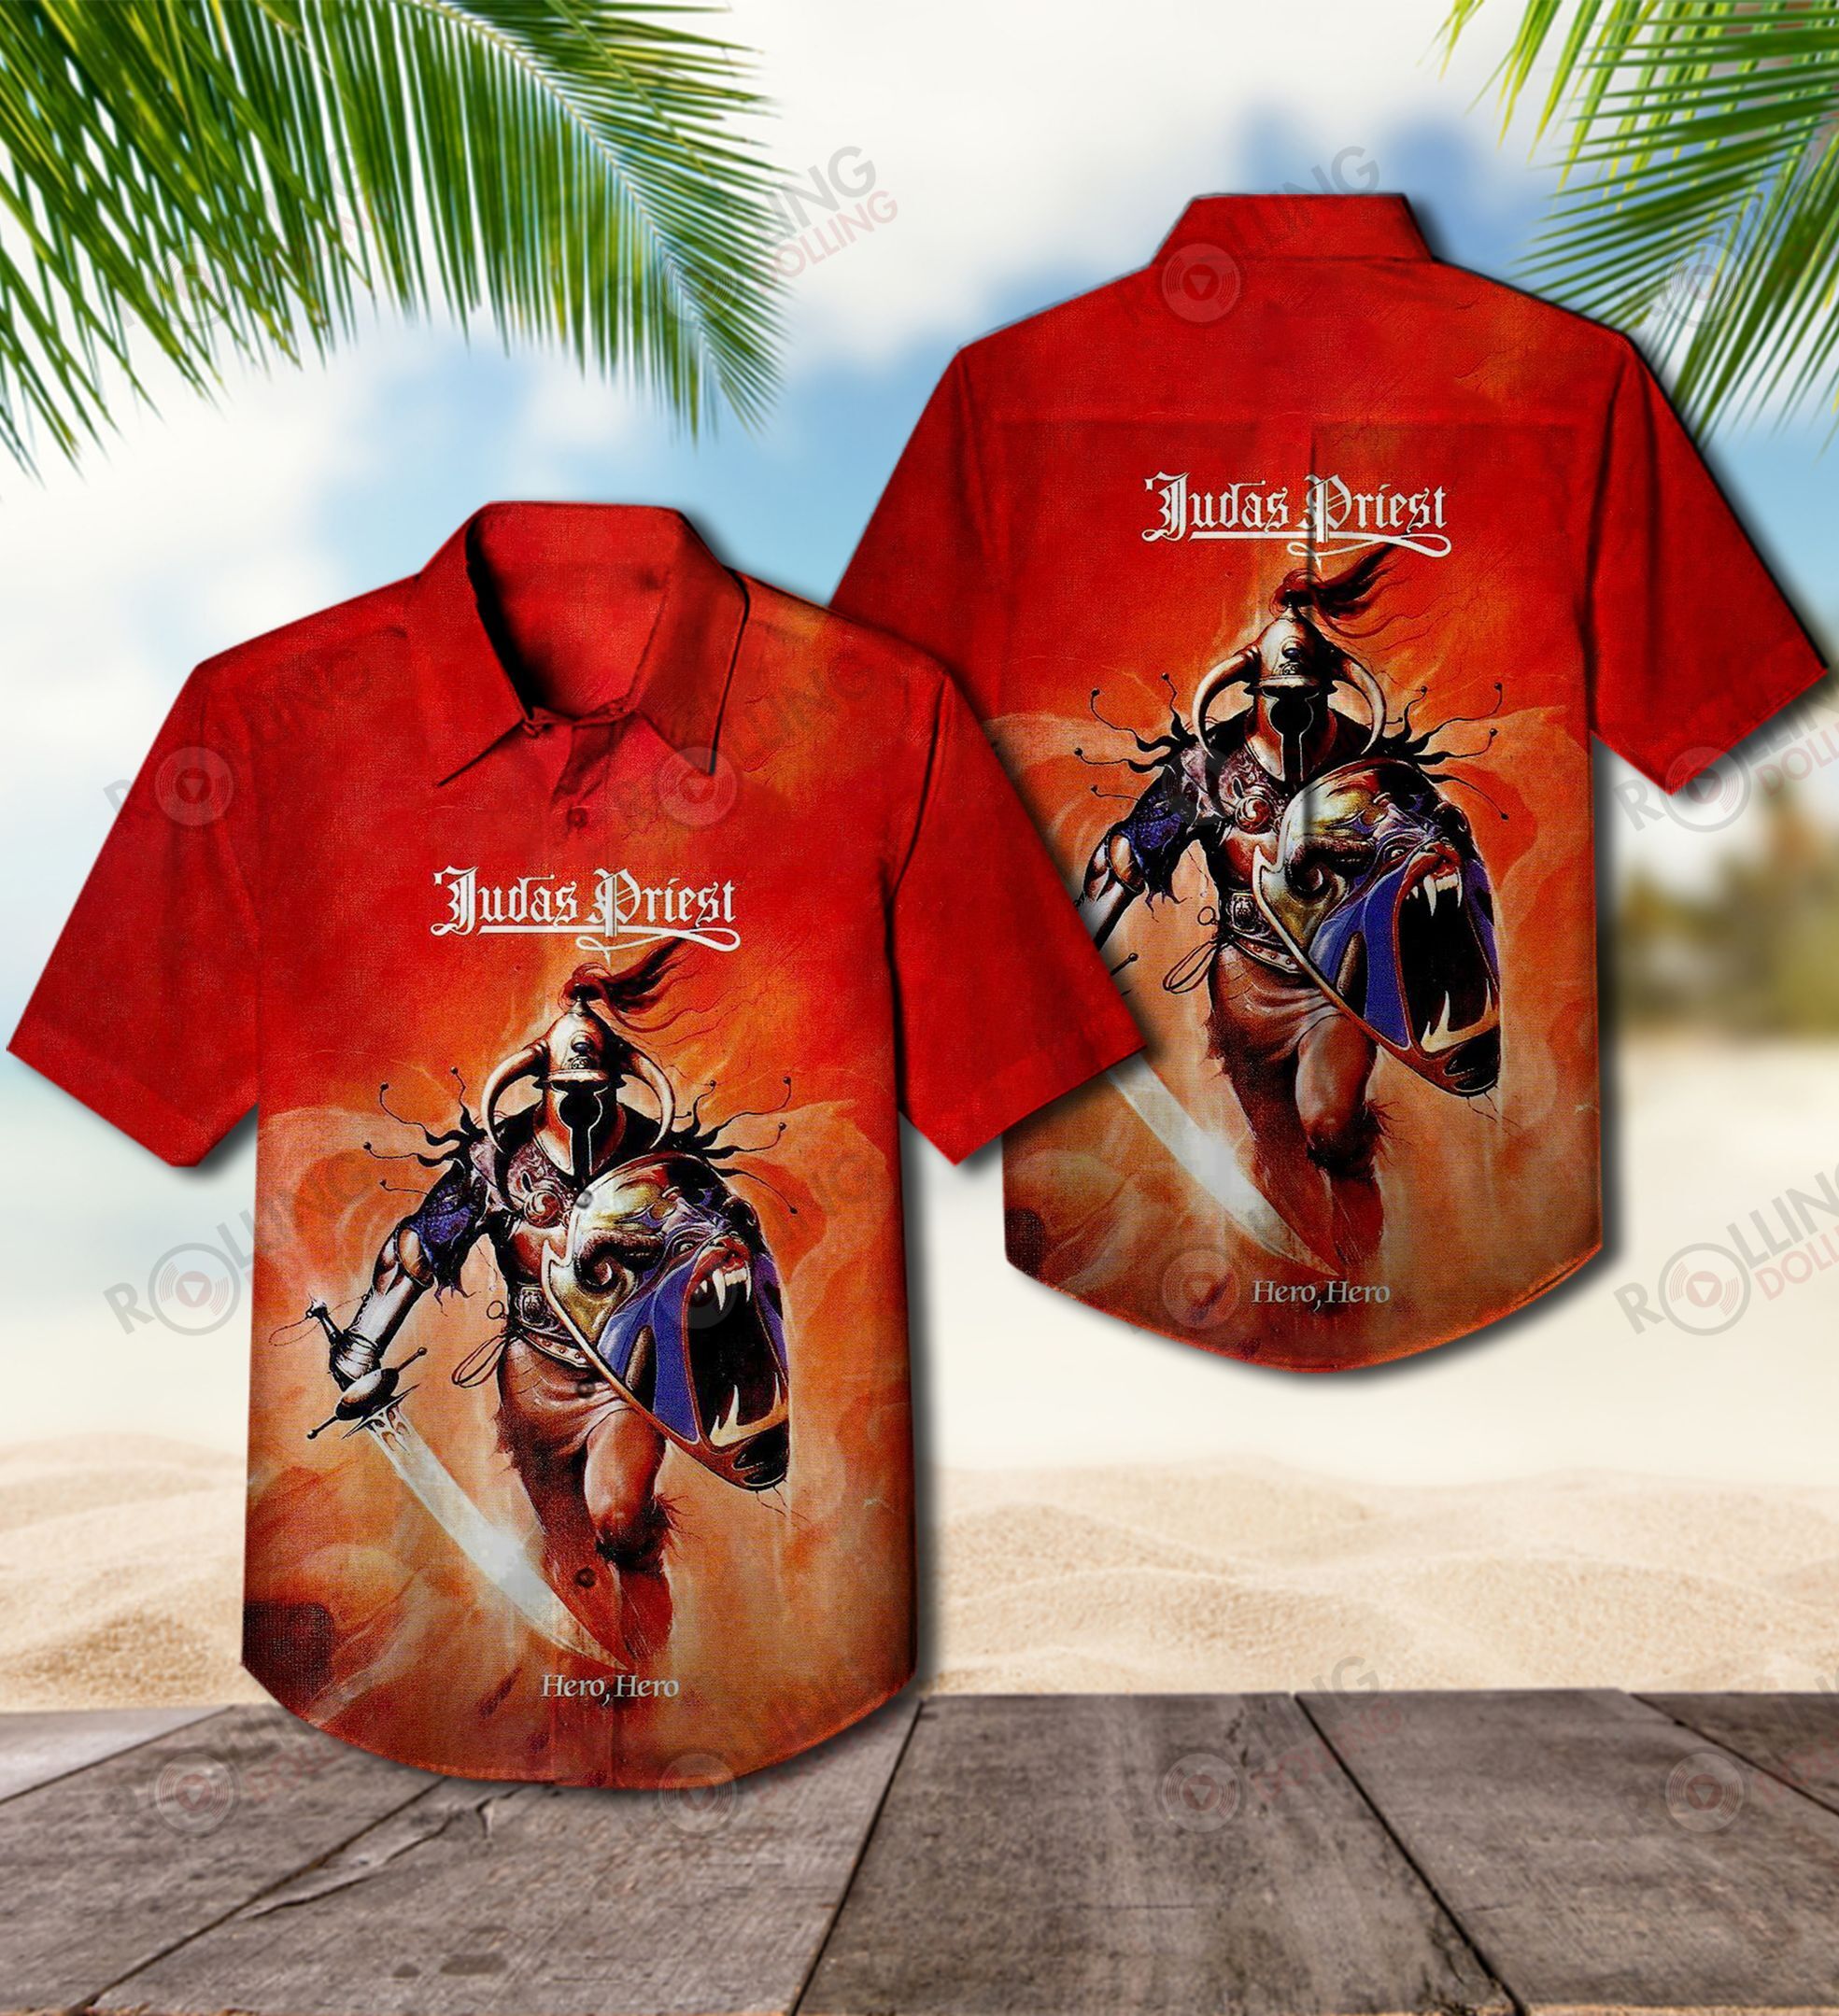 This would make a great gift for any fan who loves Hawaiian Shirt as well as Rock band 109